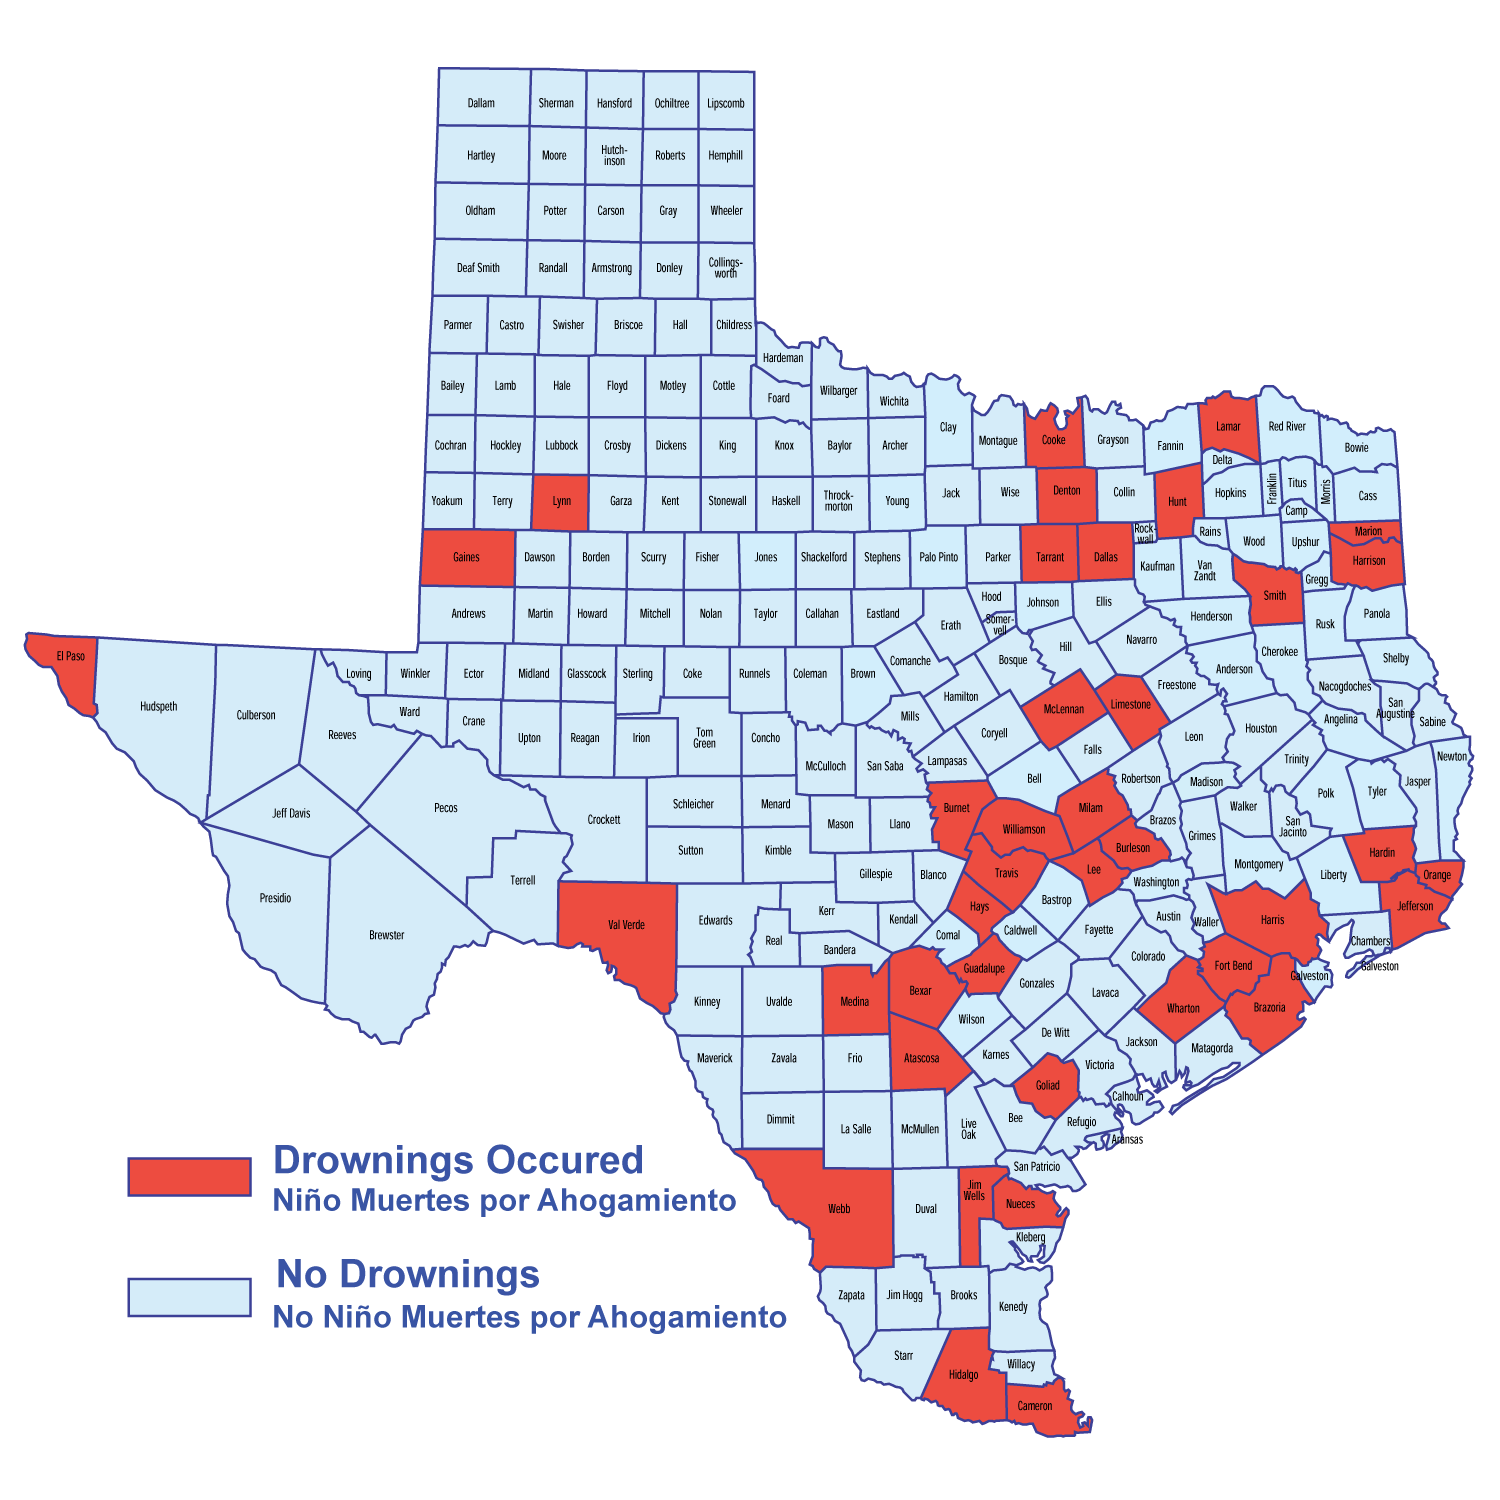 2011 Child Drownings in Texas